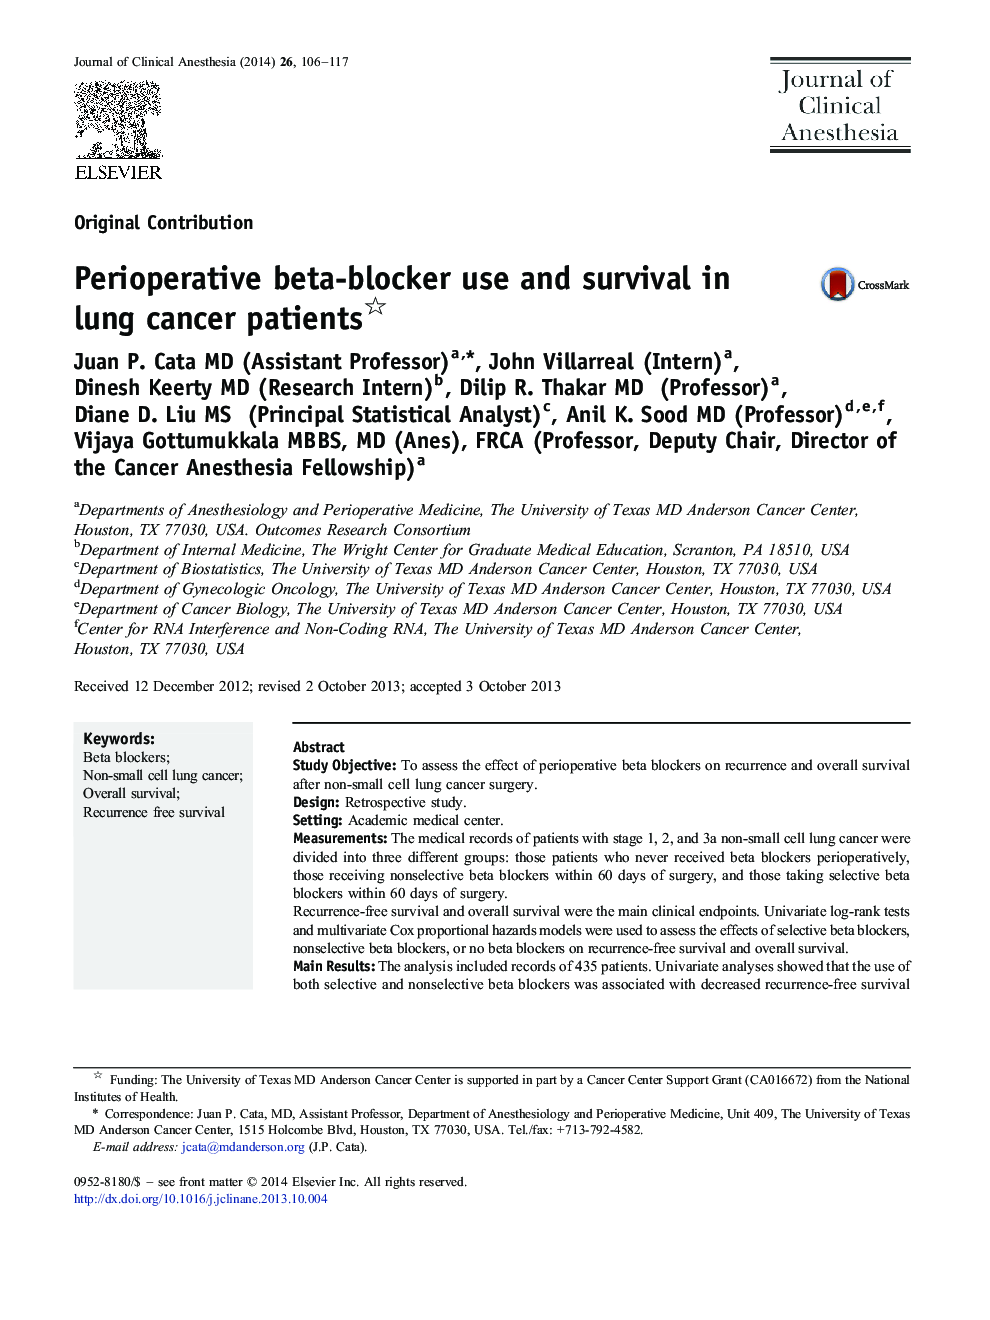 Perioperative beta-blocker use and survival in lung cancer patients 